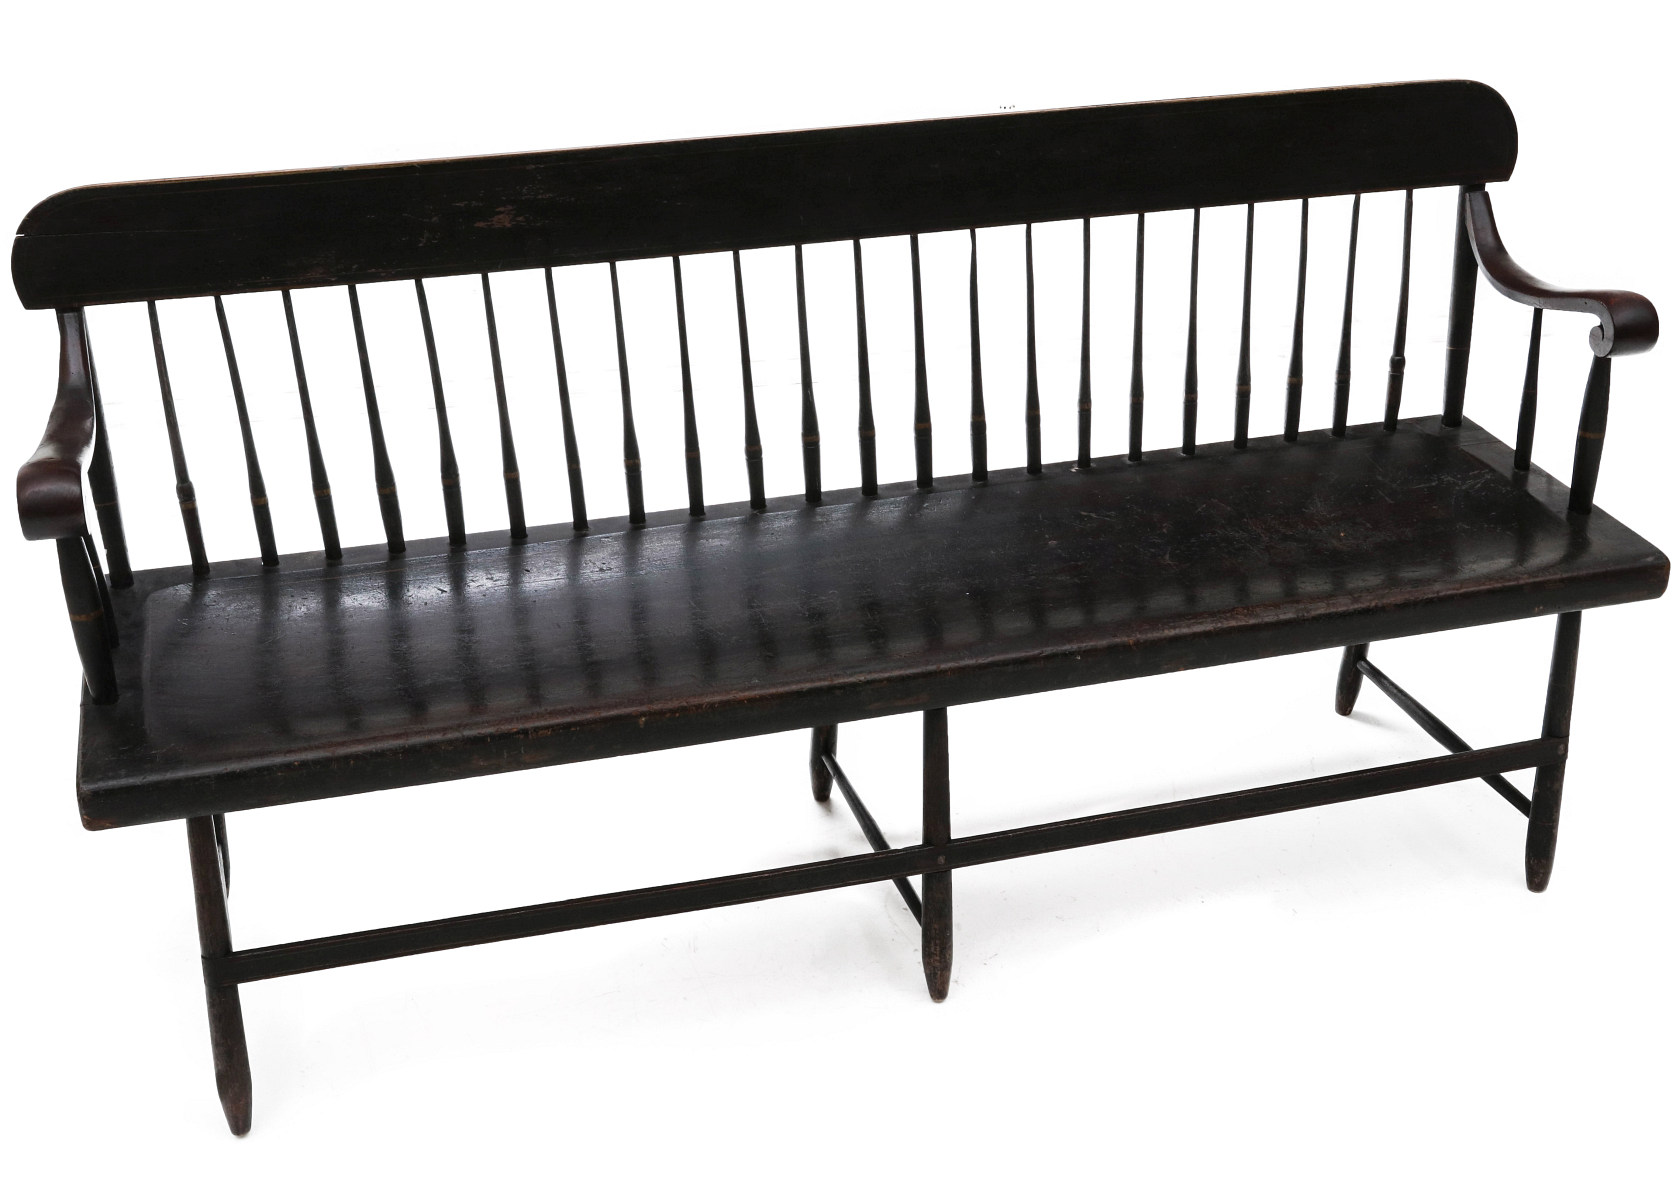 A 19TH CENTURY AMERICAN WINDSOR STYLE SETTLE BENCH